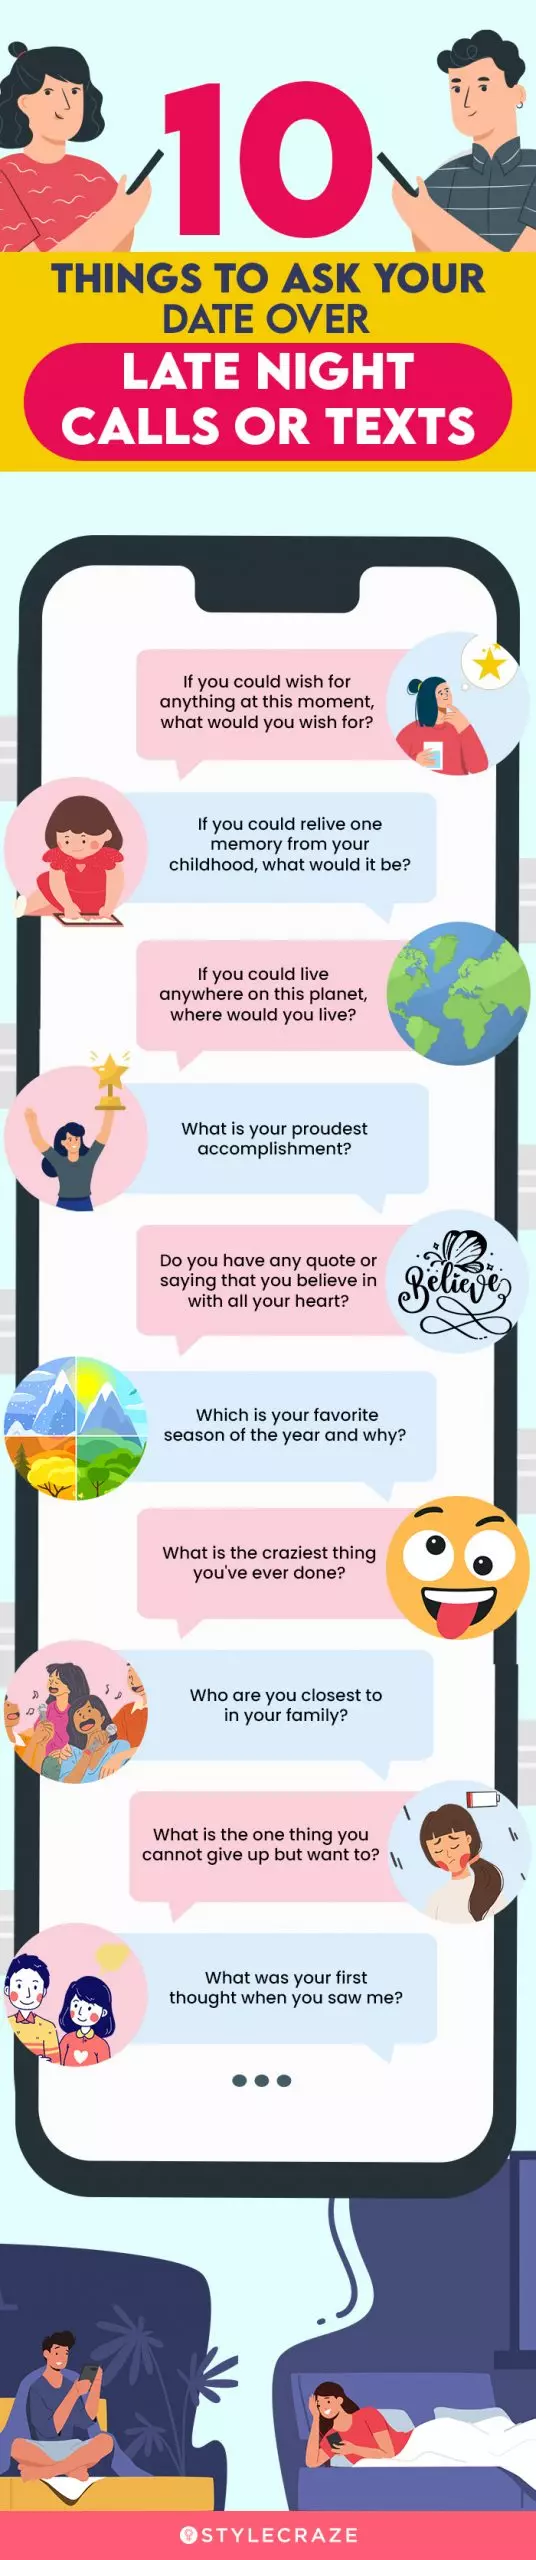 10 things to ask your date over late night calls or texts (infographic)